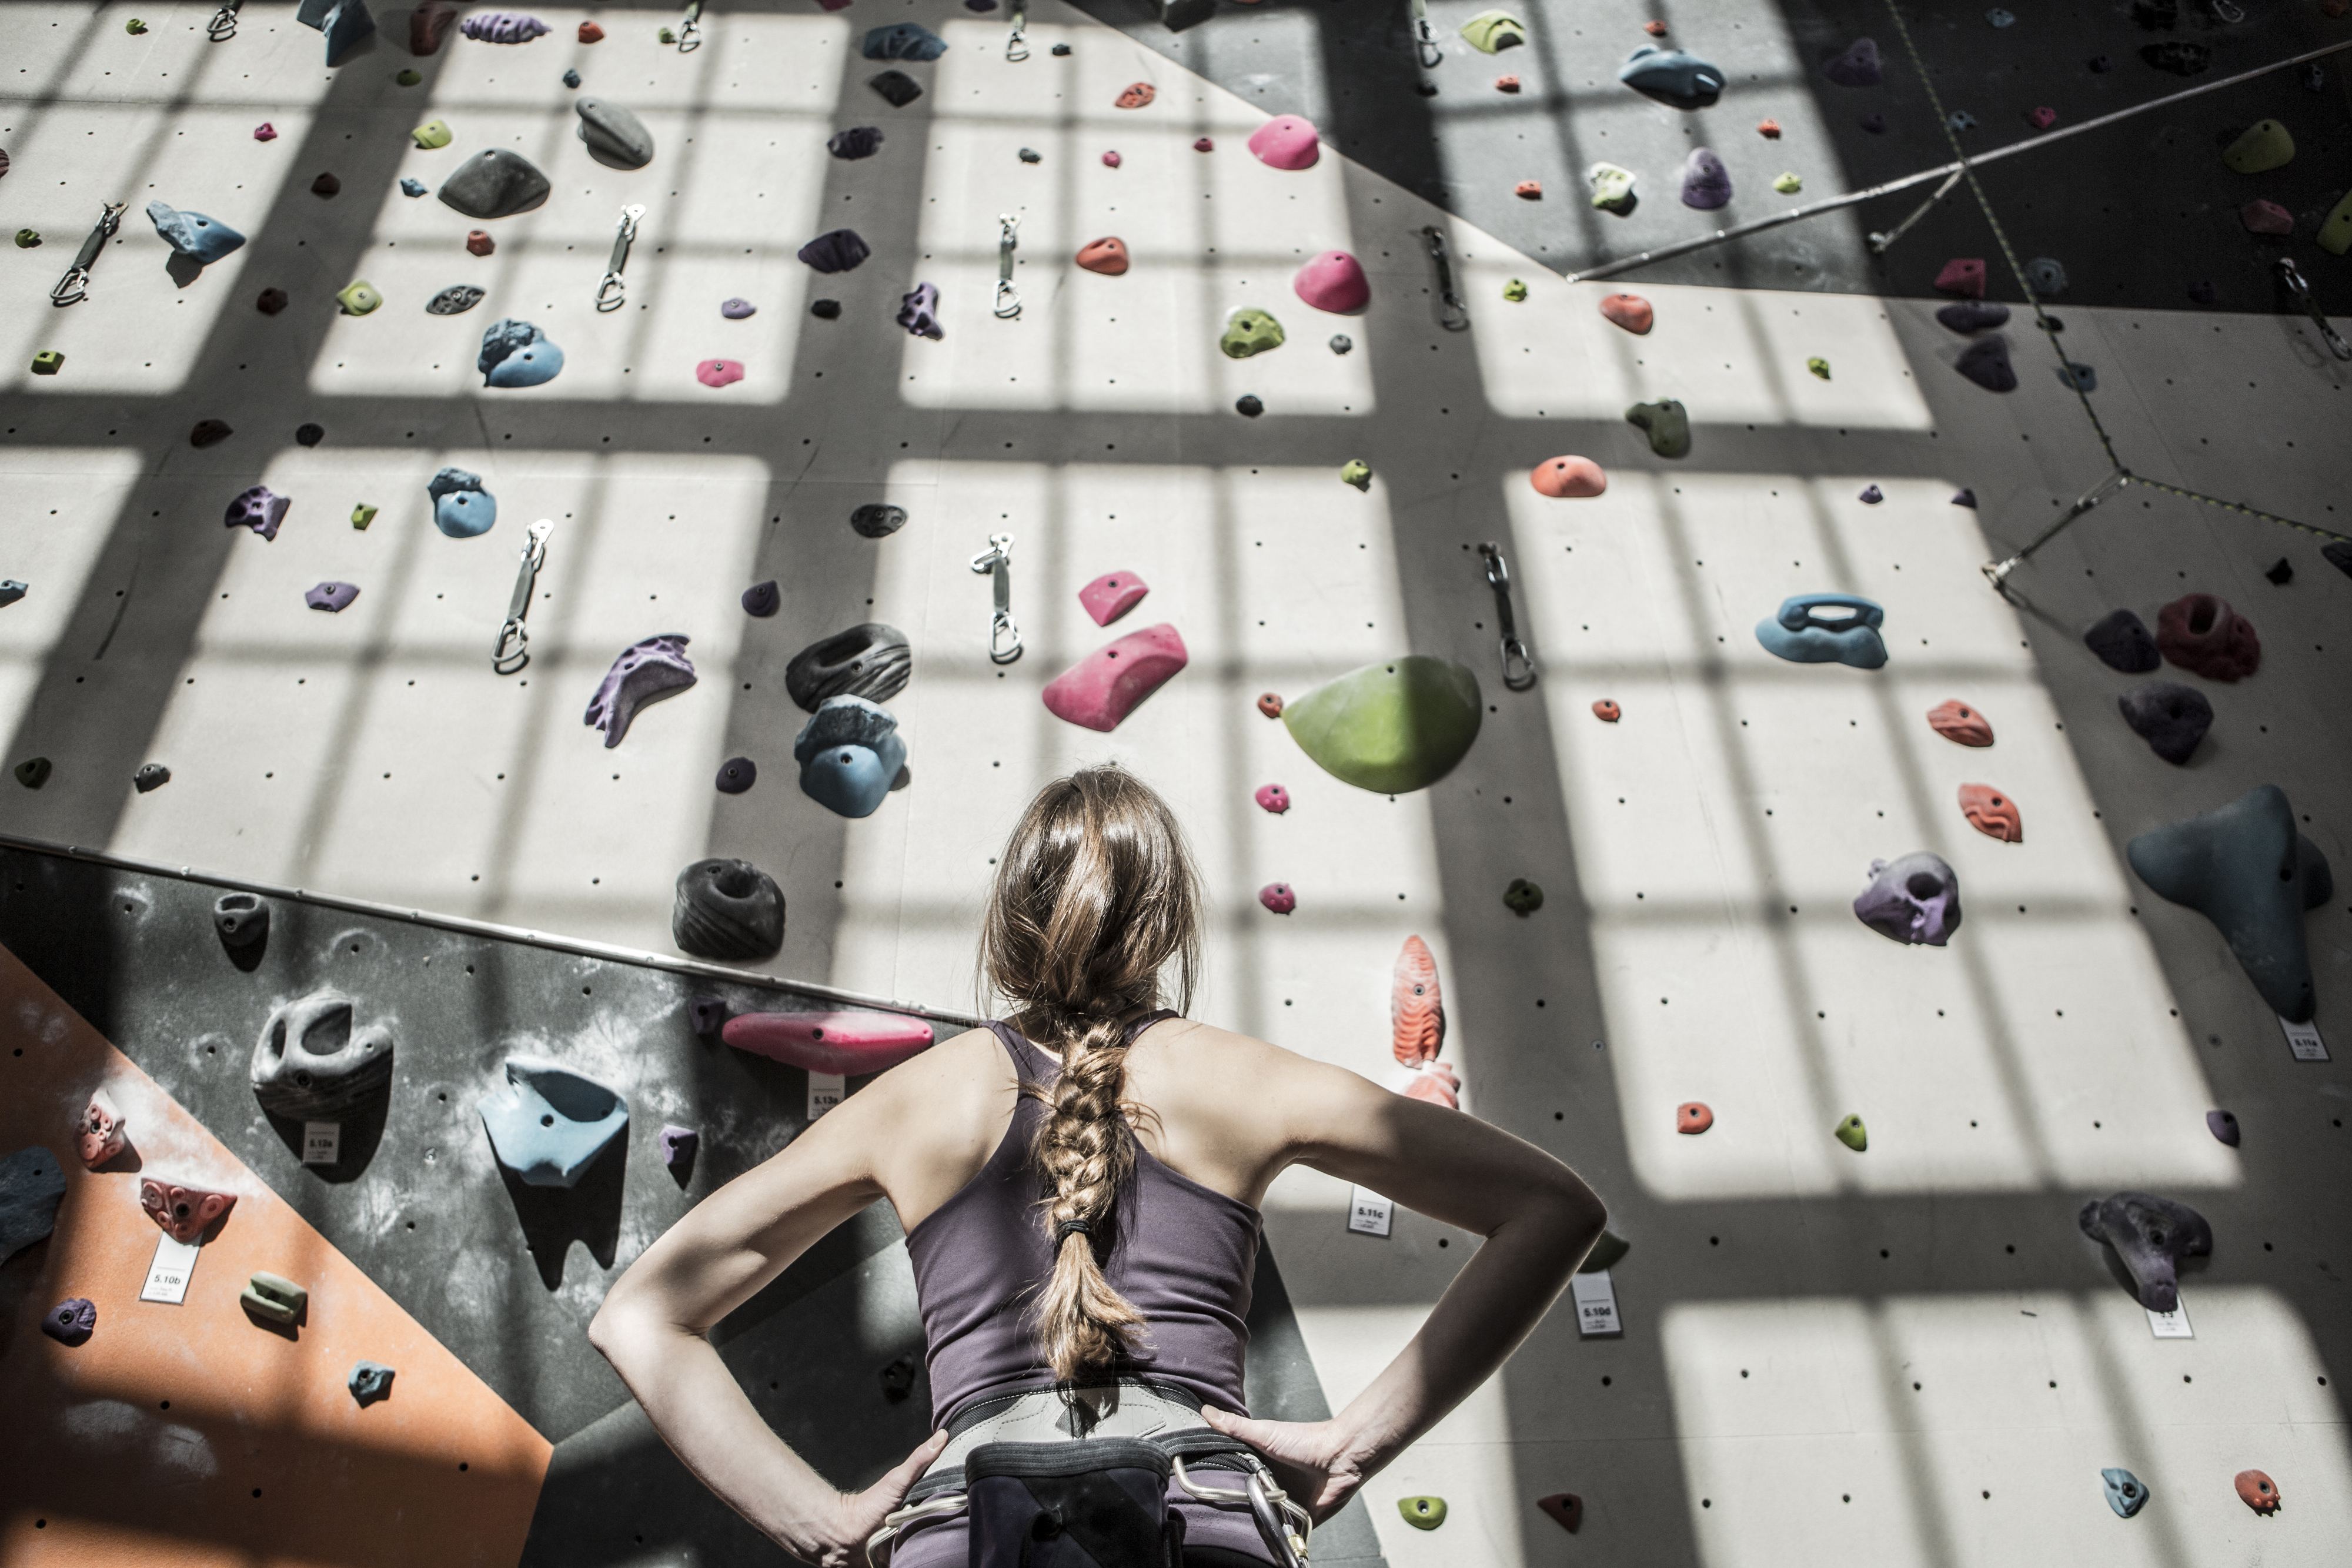 Woman in sportswear preparing to climb an indoor rock wall with various handholds